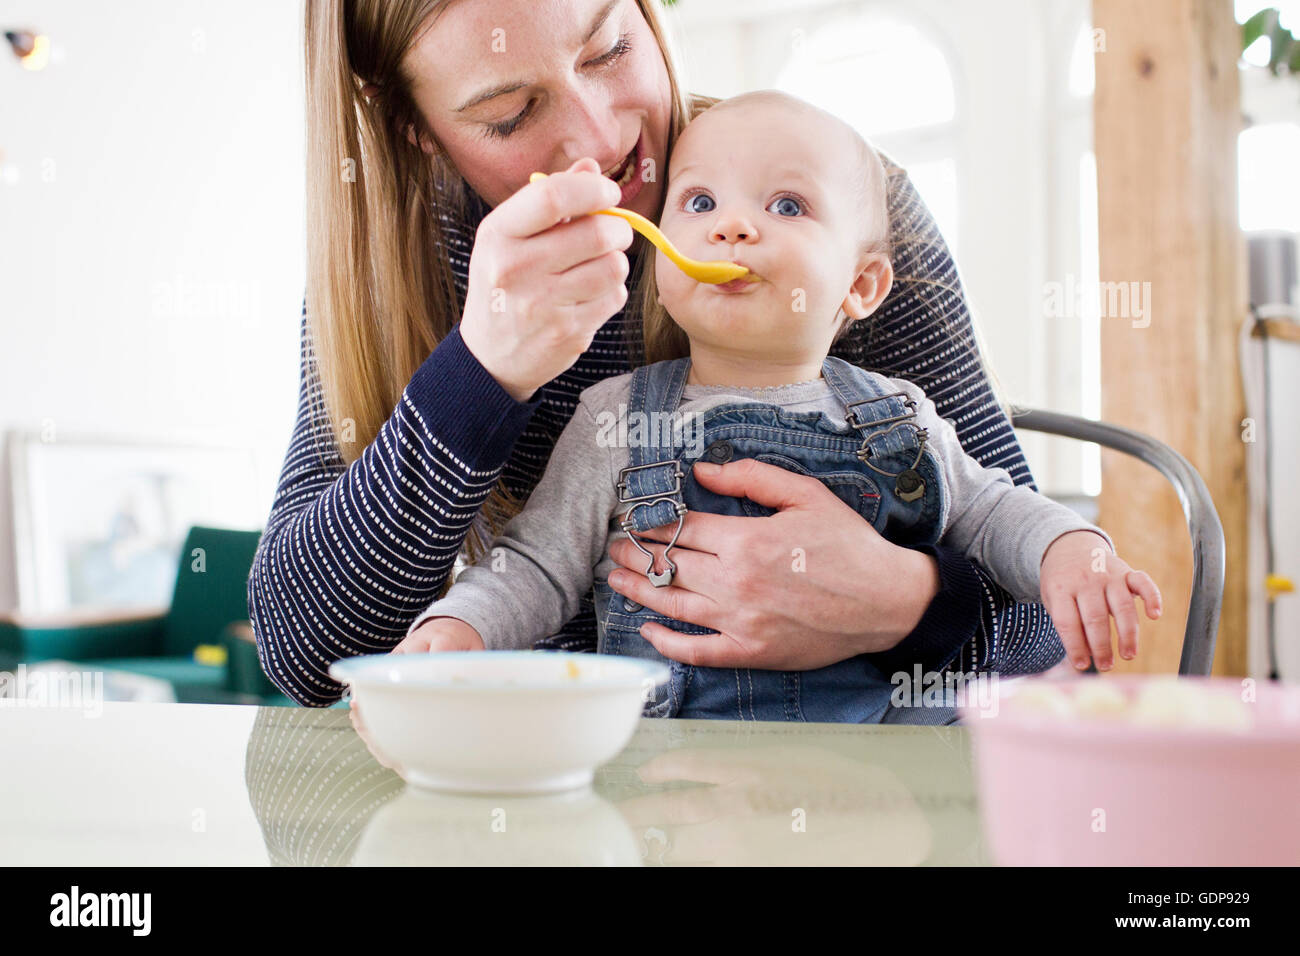 Mid adult woman feeding baby daughter at kitchen table Stock Photo